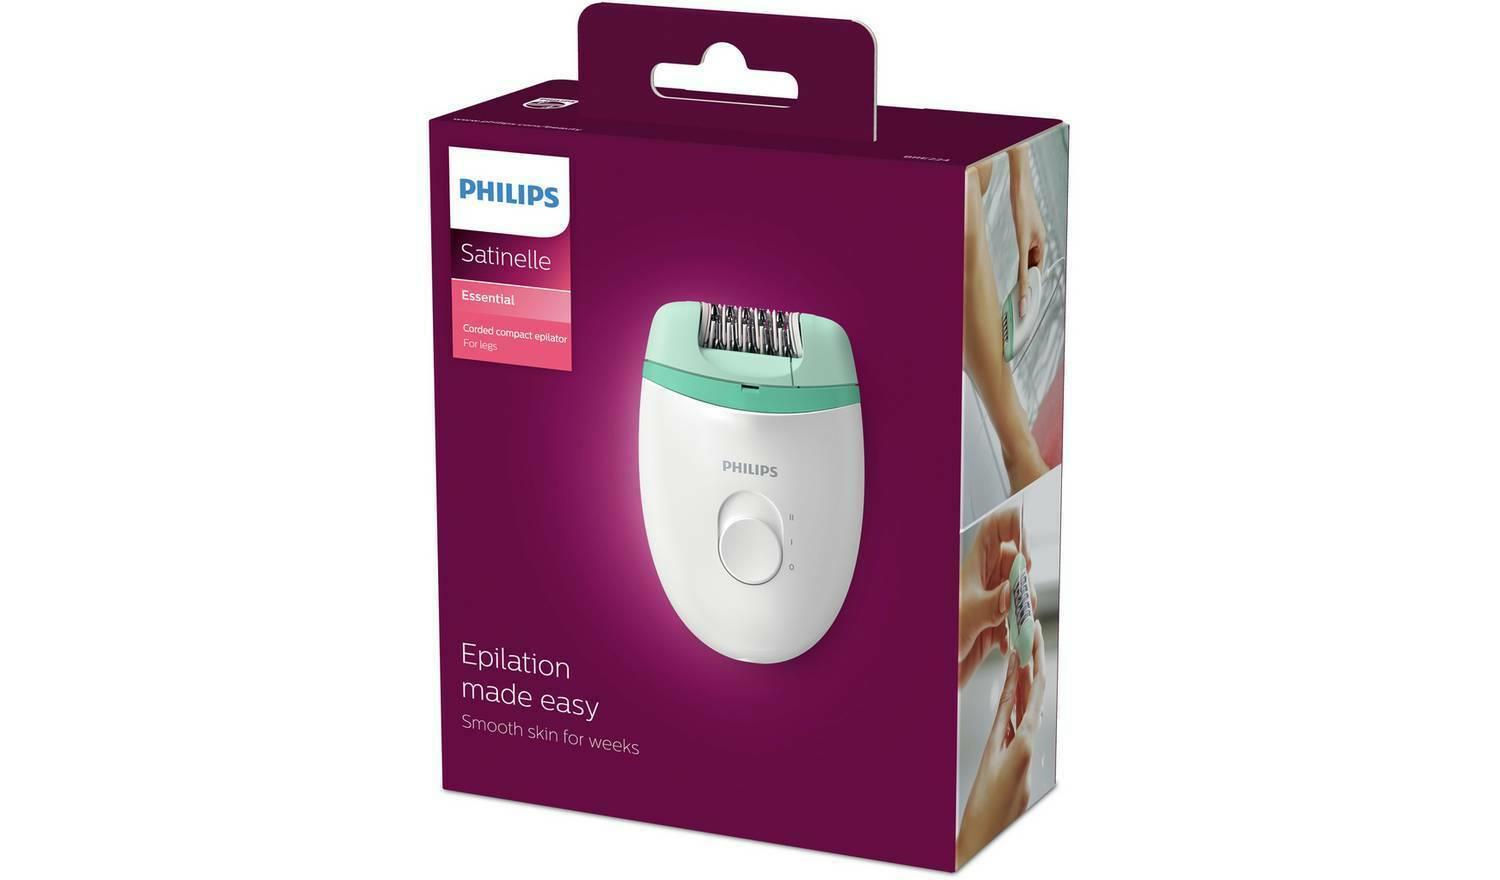 Satinelle Essential Epilator Philips, Corded ,Compact Hair Removal Bre224/00